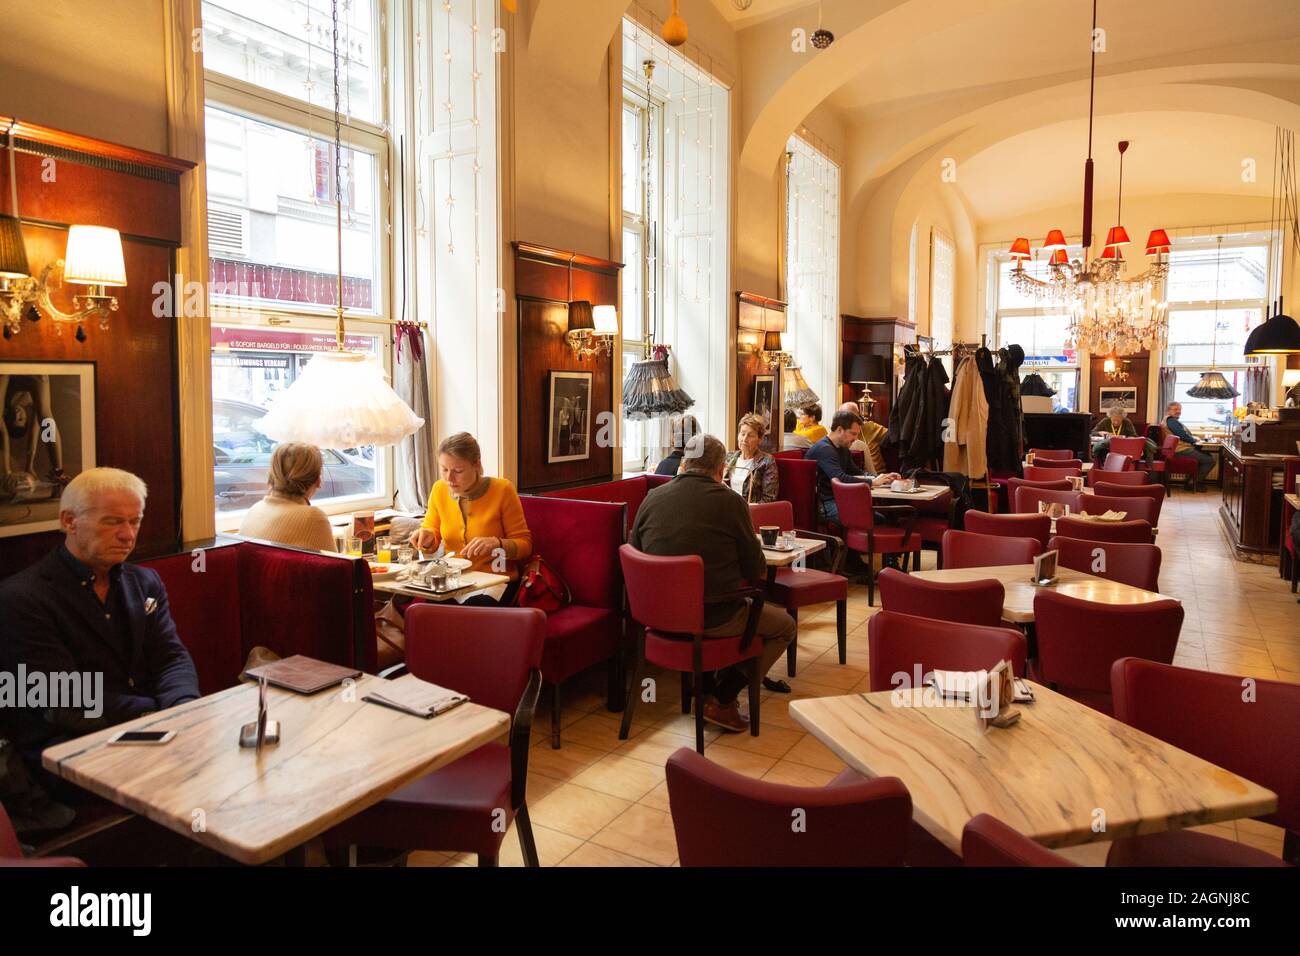 Cafe Diglas Vienna interior, people eating and drinking in one of the well known coffee houses of Vienna Austria Stock Photo